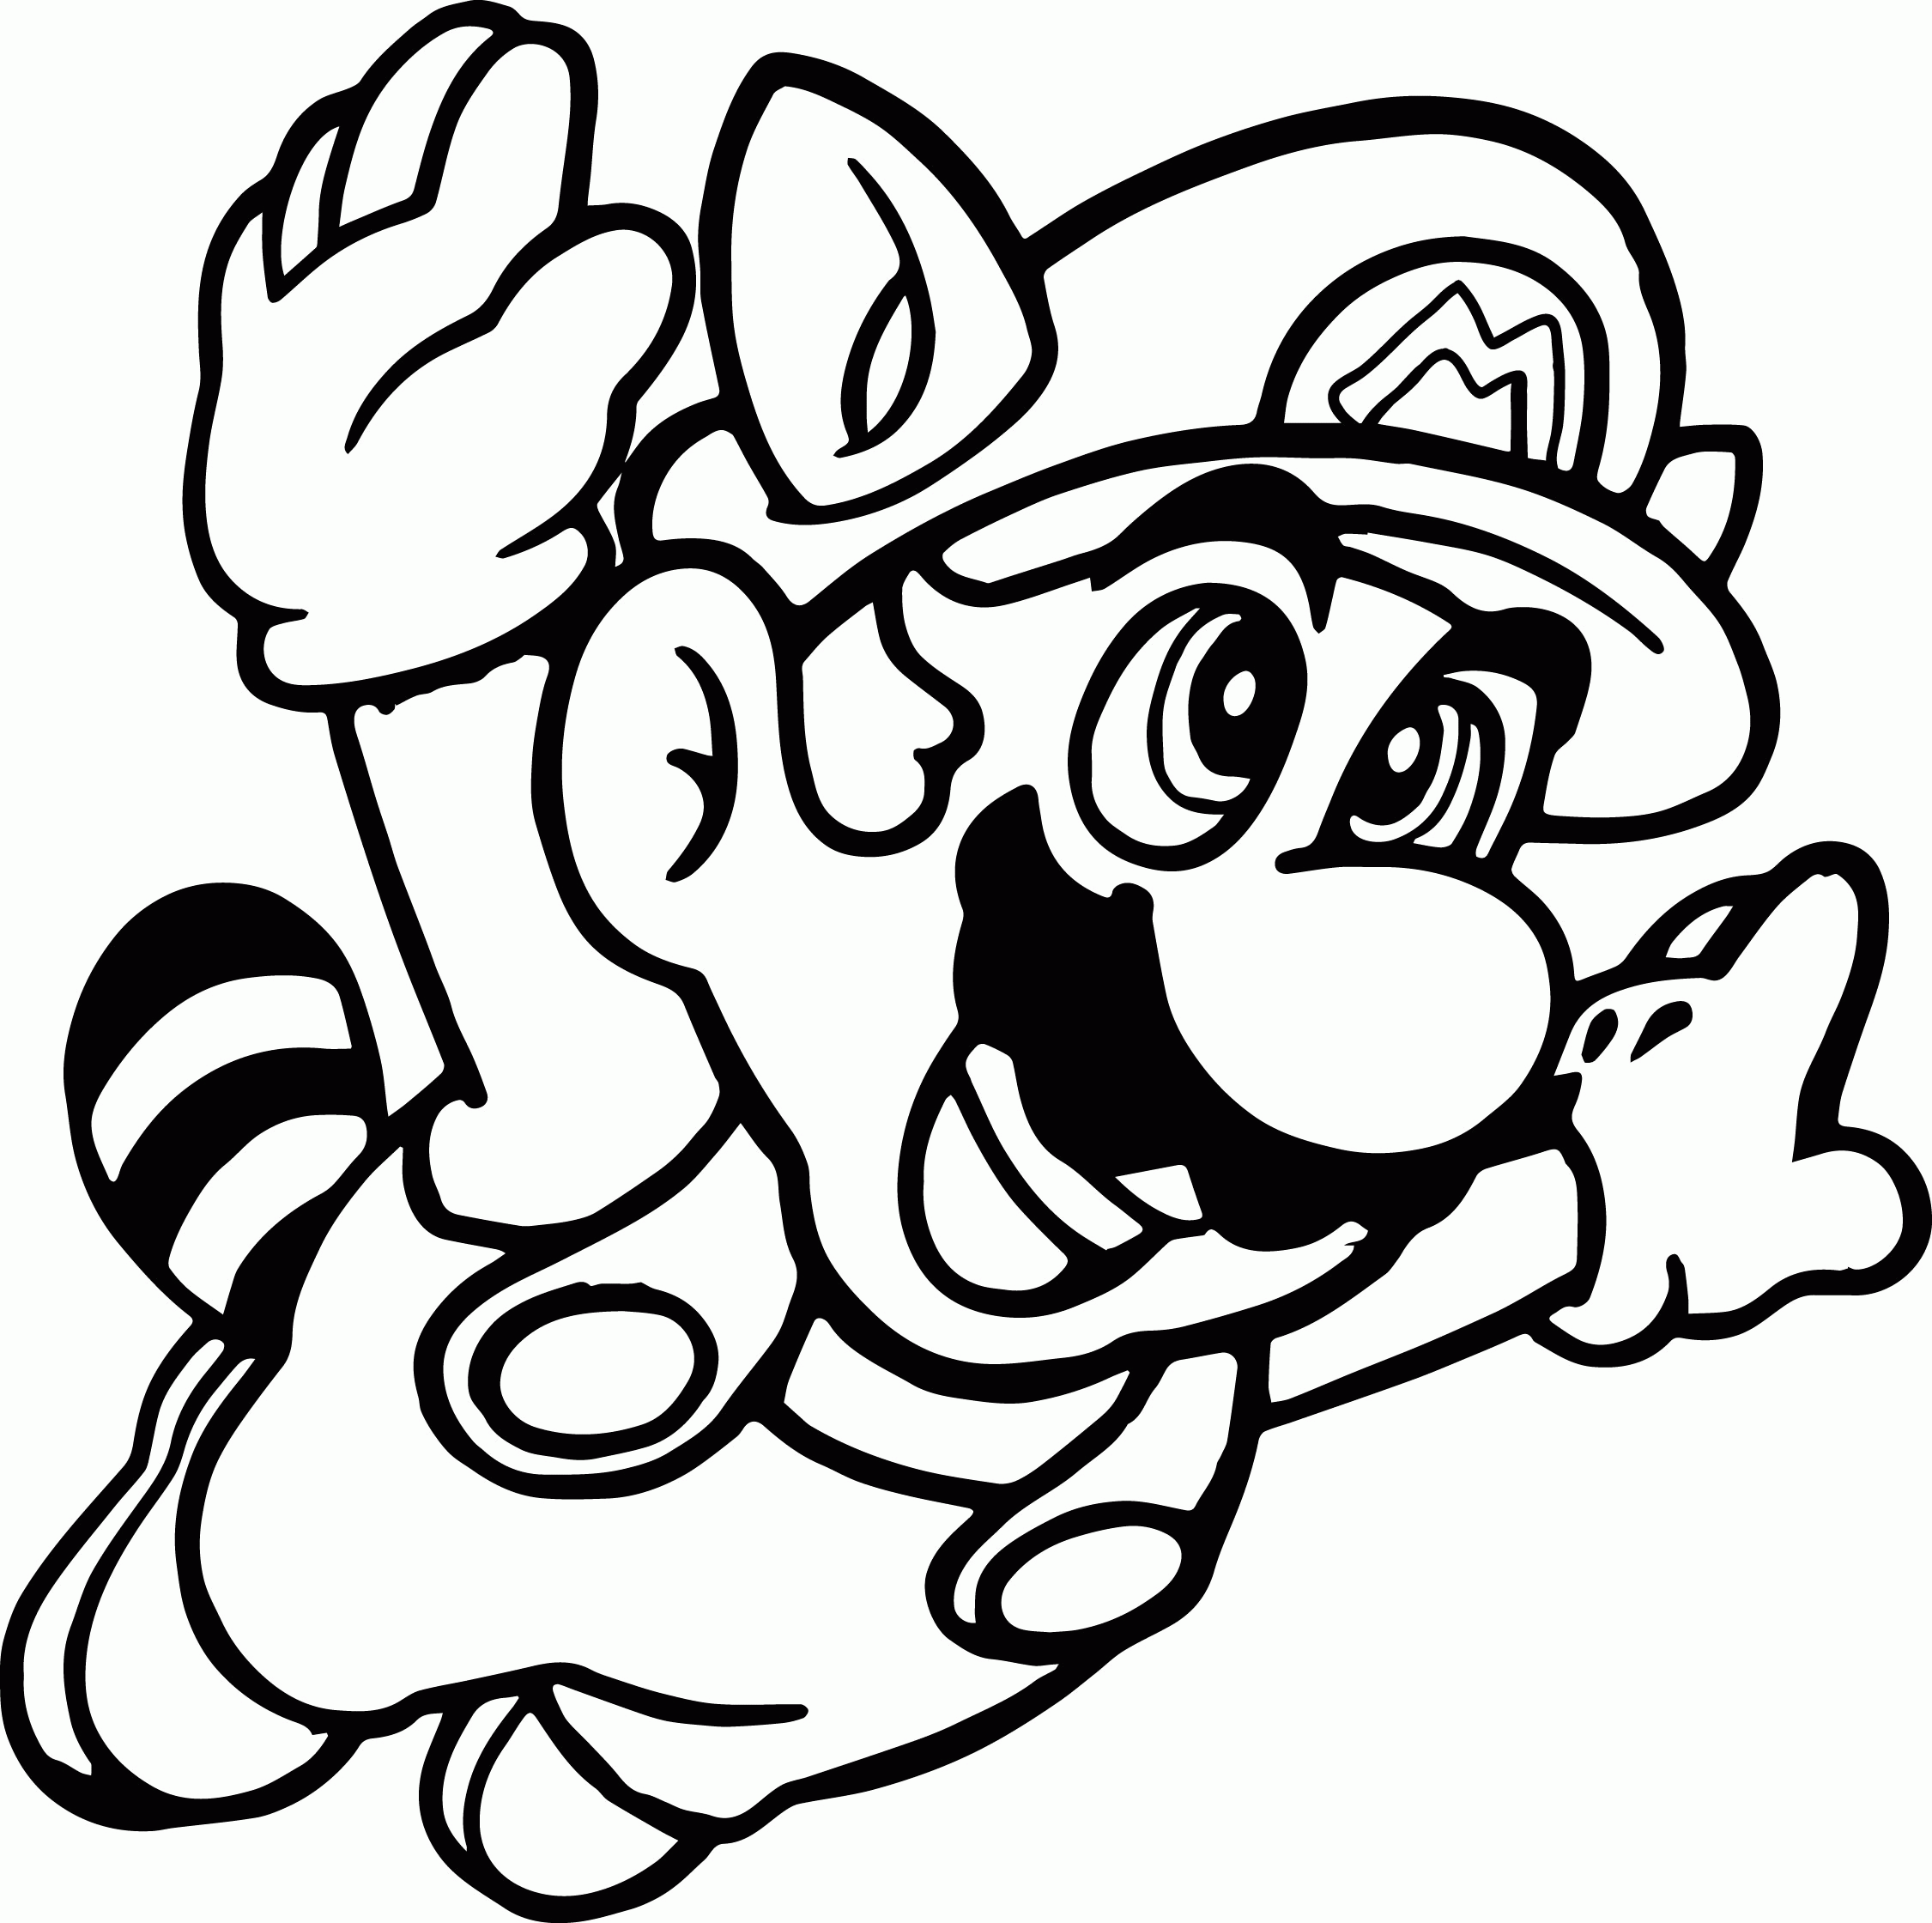 Free Toad Coloring Pages From Super Mario Download Free Toad Coloring